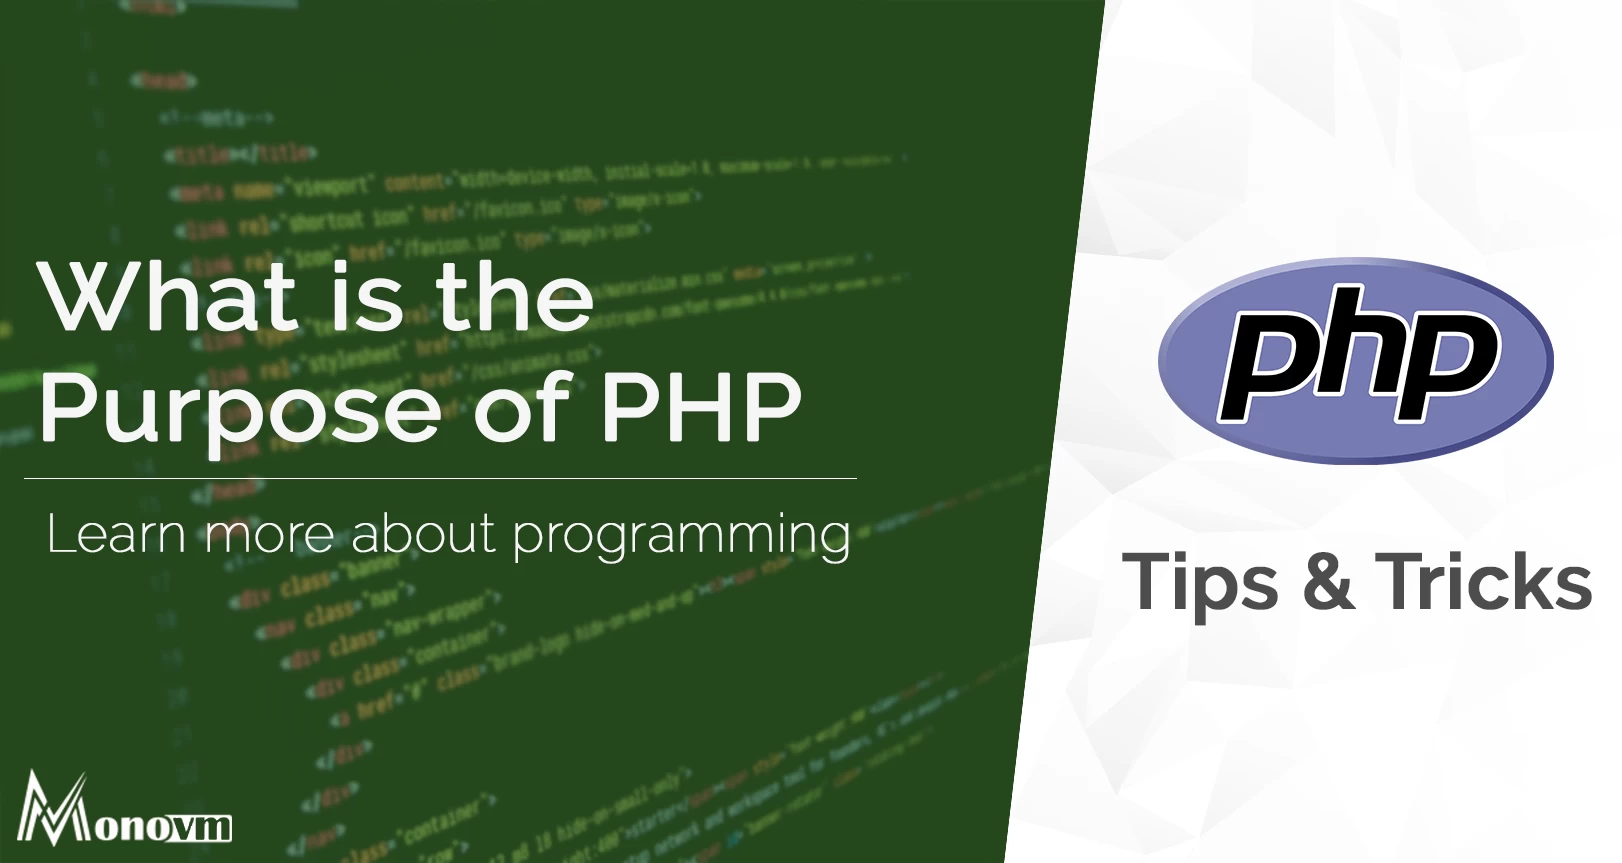 What is the Purpose of PHP?